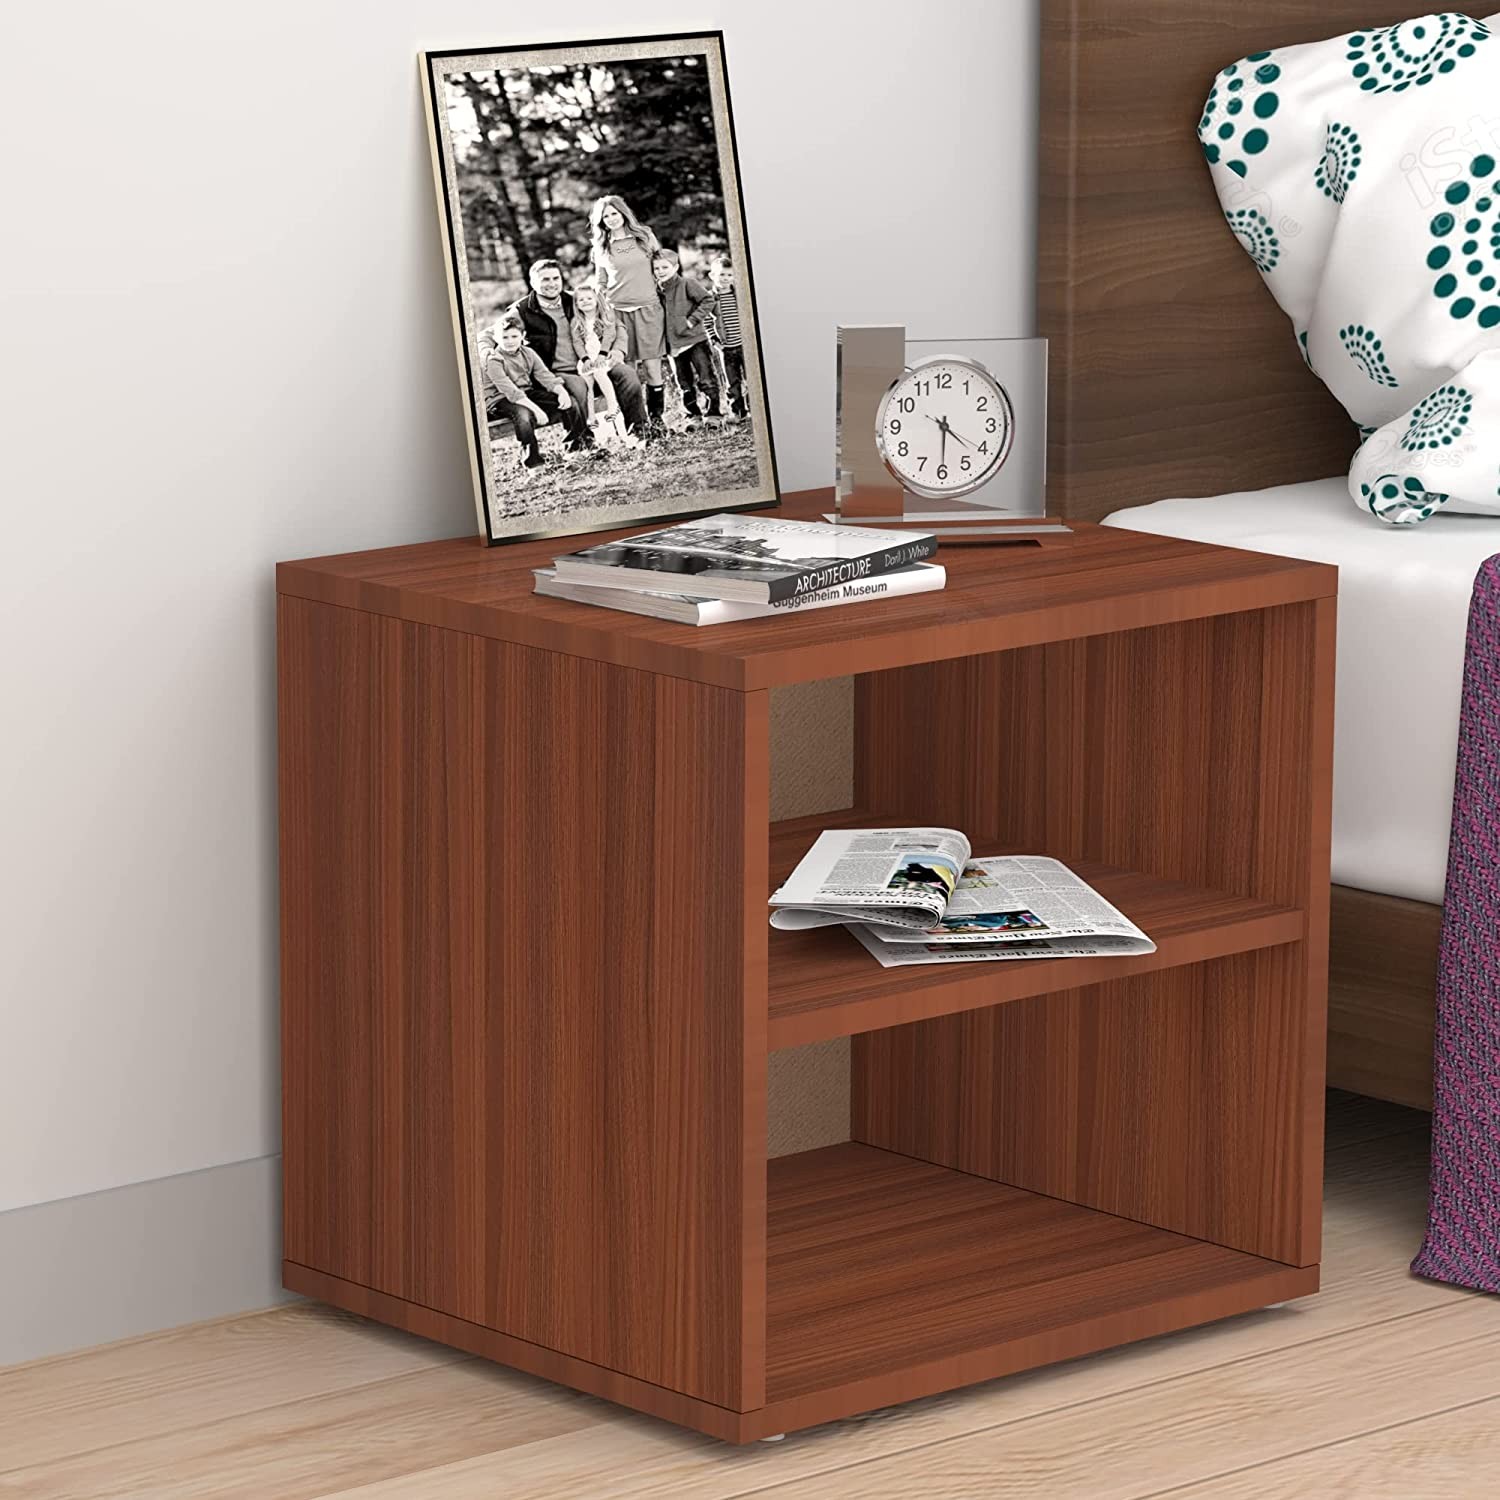 addy-engineered-wood-bed-side-table-end-table-walnut-rd-addy-wnt